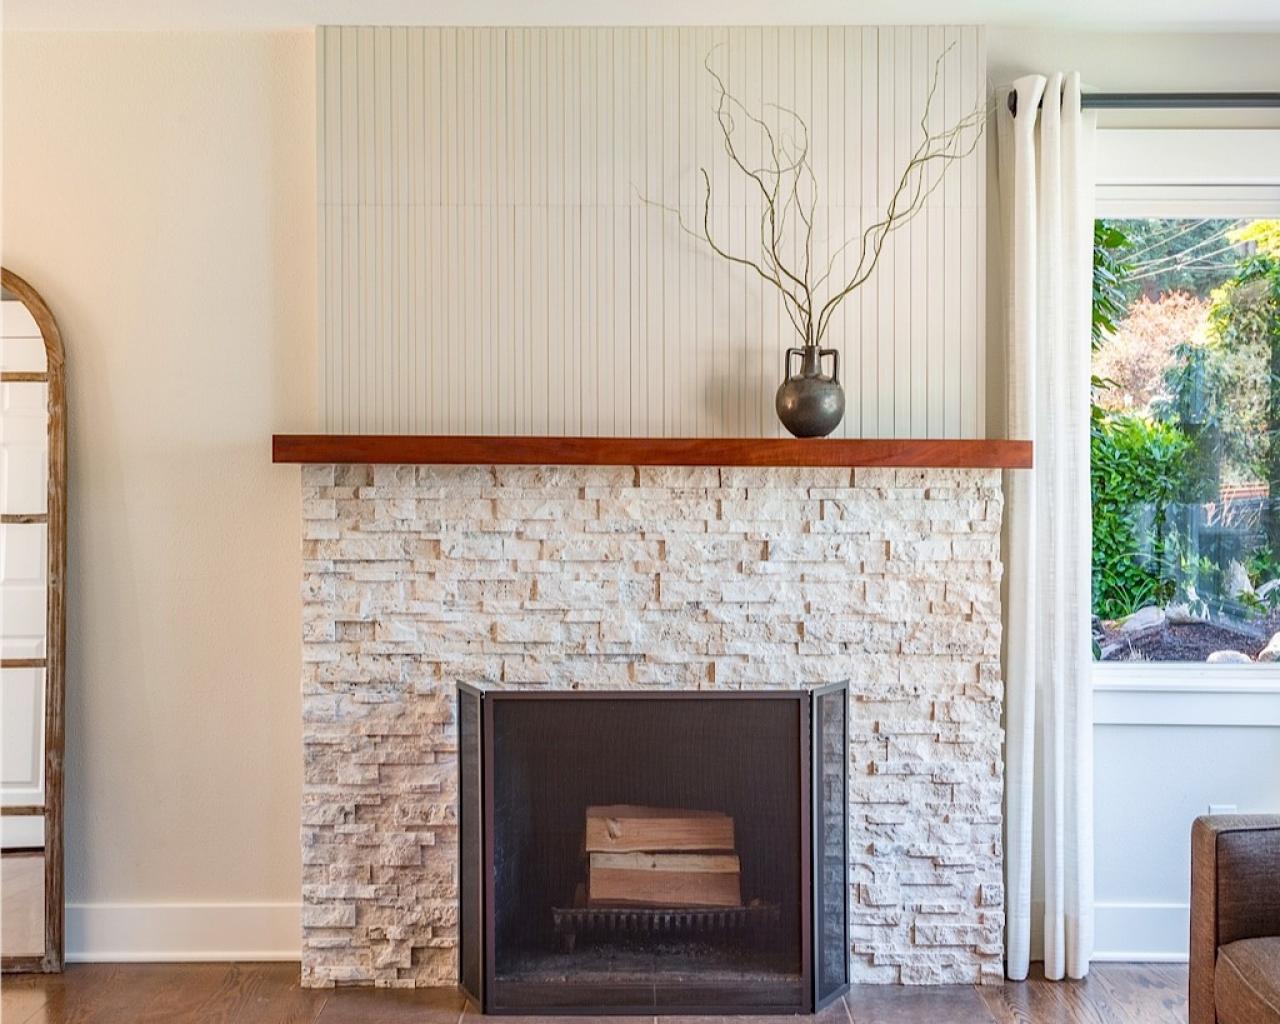 Fireplace Maintenance And Safety, How To Clean A Stone Fireplace Front